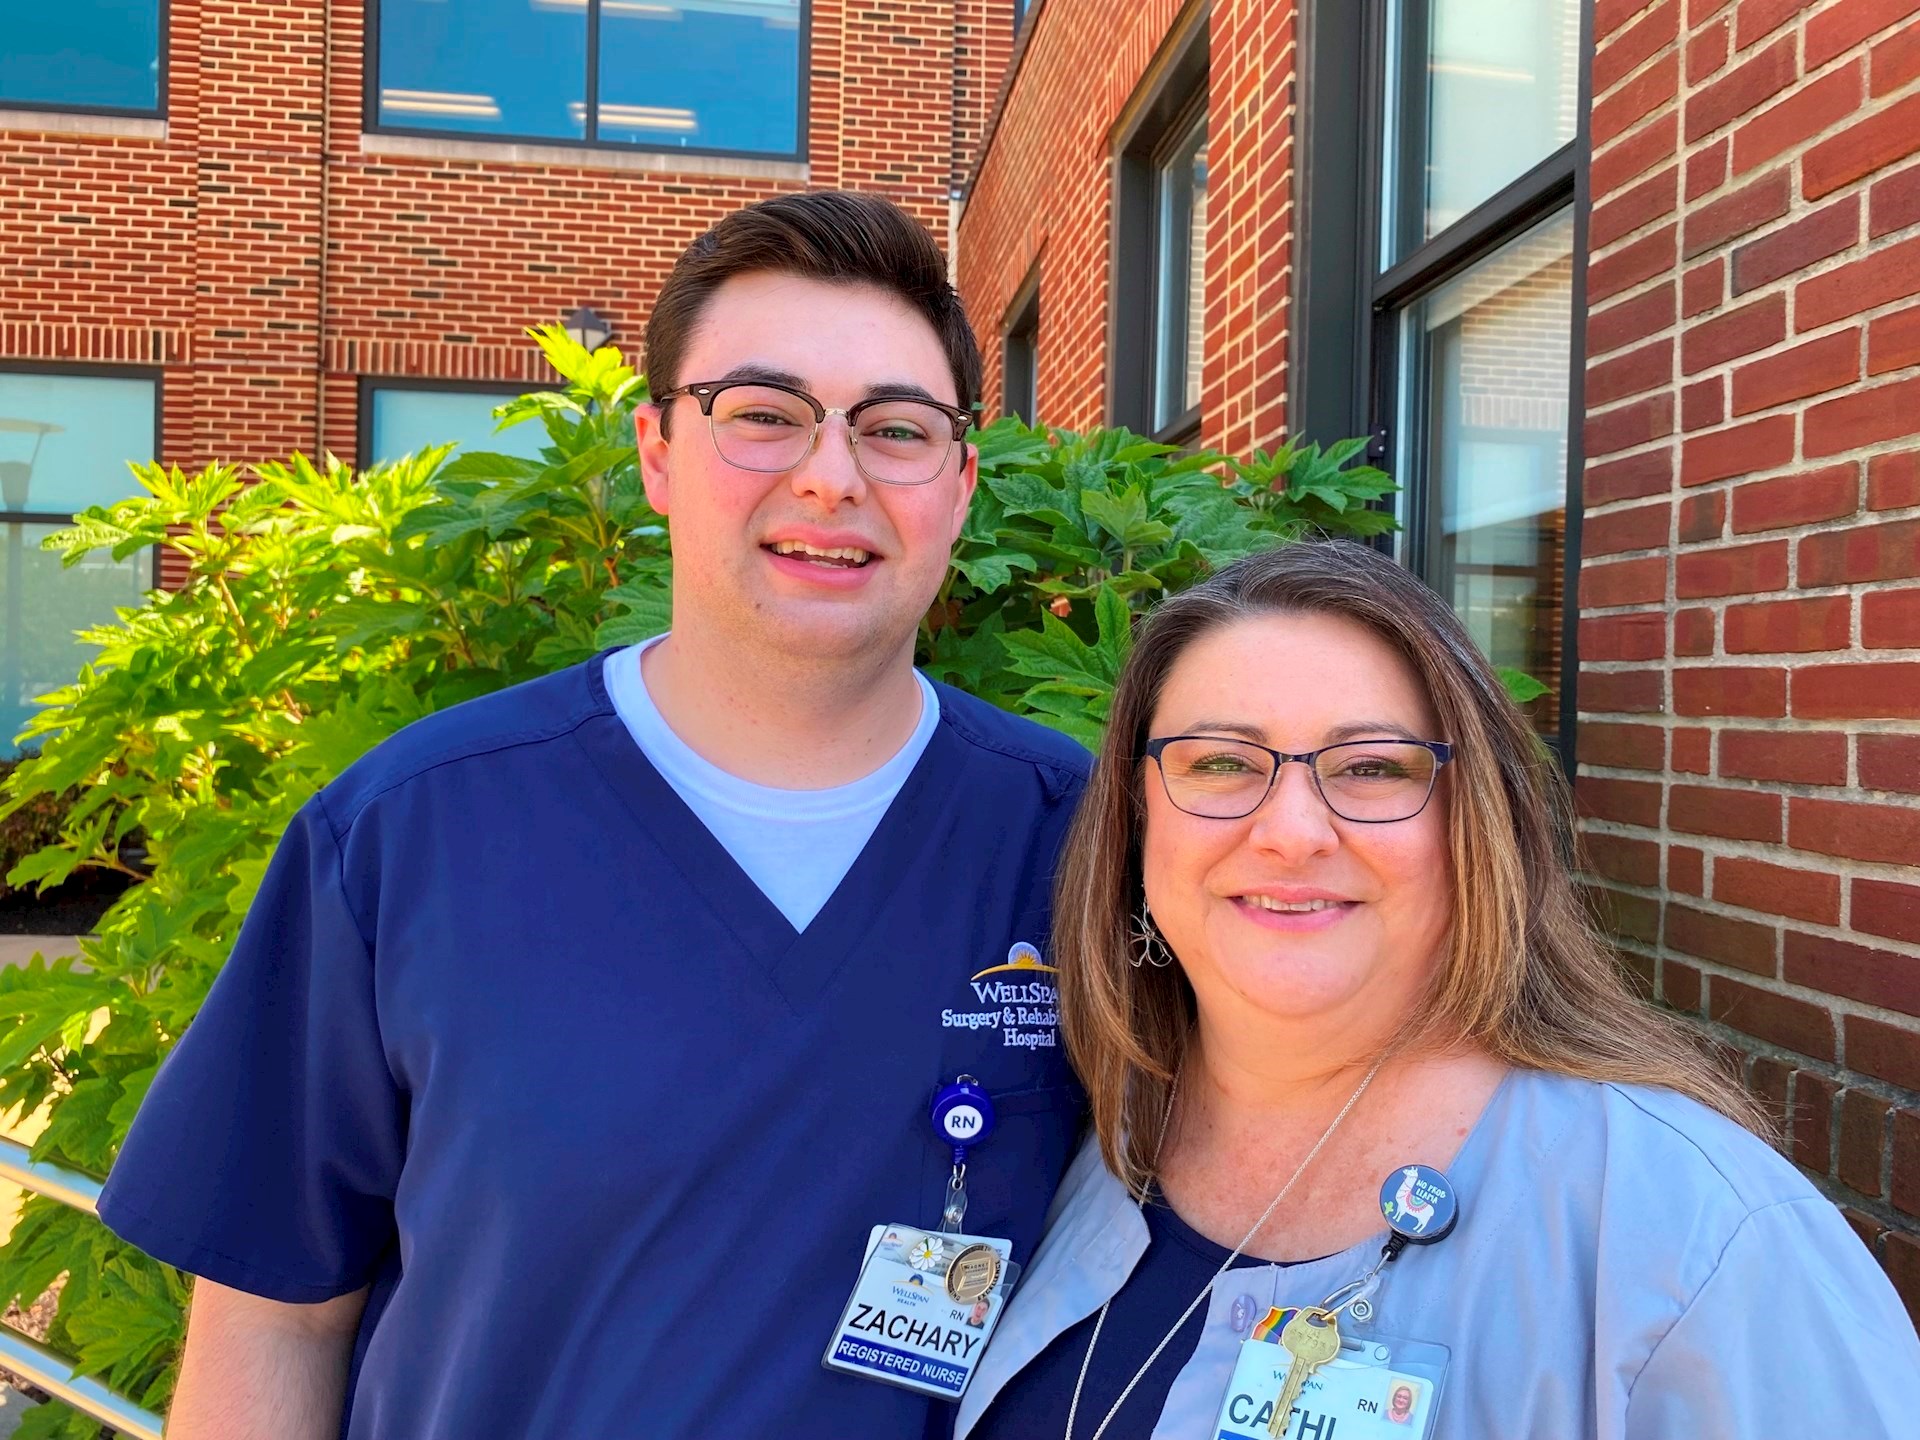 Zach Gibbs followed in the nursing footsteps of his mom, Cathi.